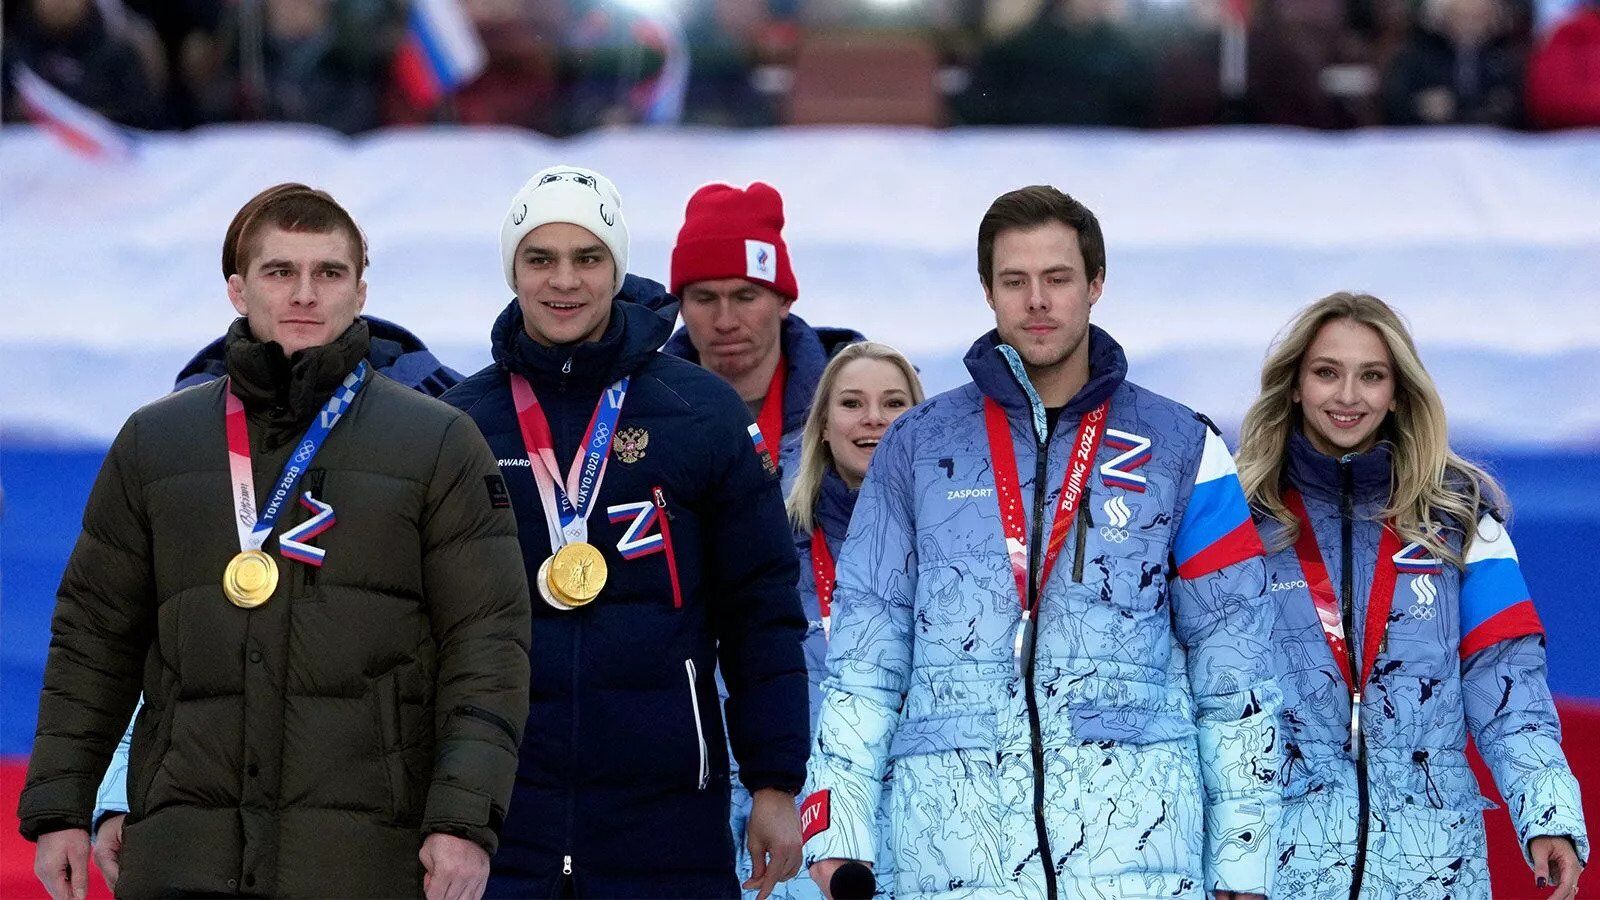 ''Harsh disqualification'': Russian Olympic champion outraged by Maguchikh's ''Glory to Ukraine!'' after World Cup victory